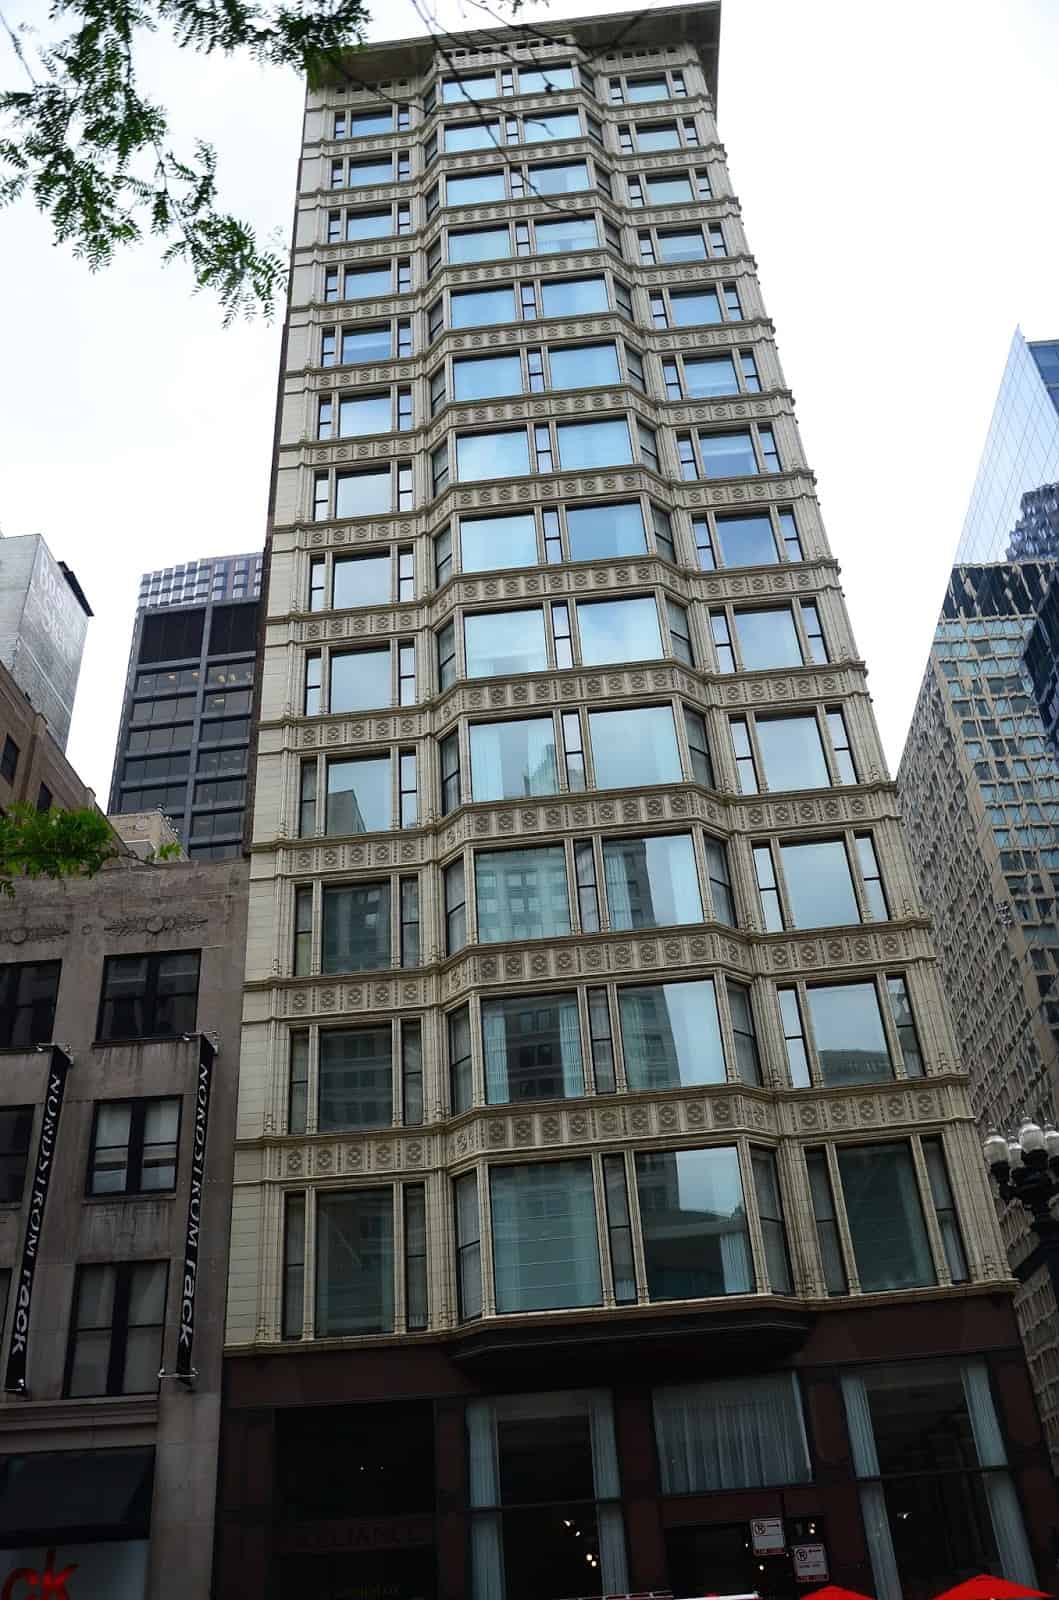 Reliance Building in Chicago